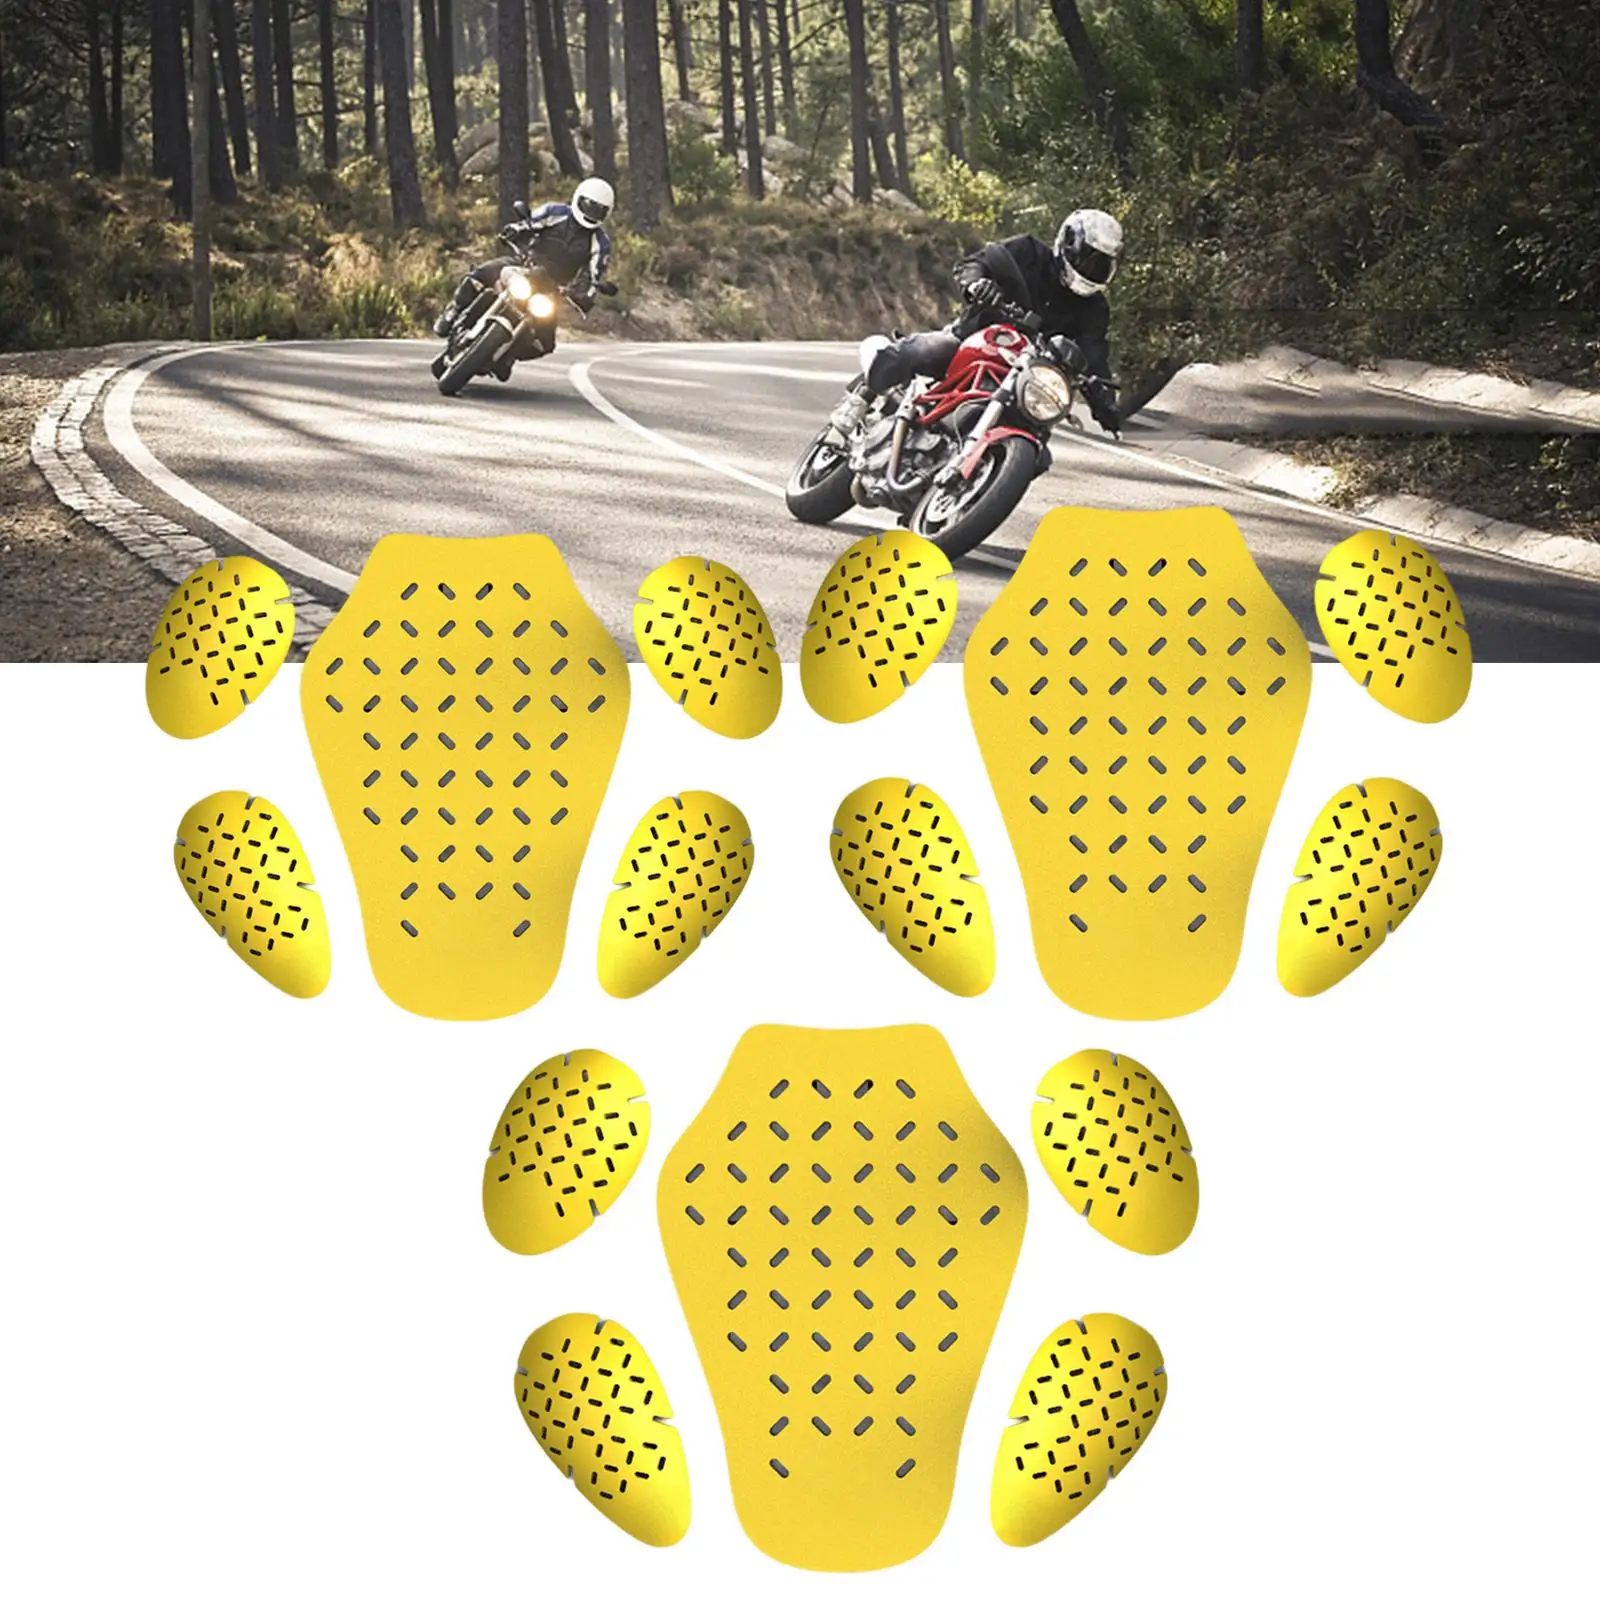 5Pcs Motorbike Insert Armor Pads Body Protector for Protection Cycling